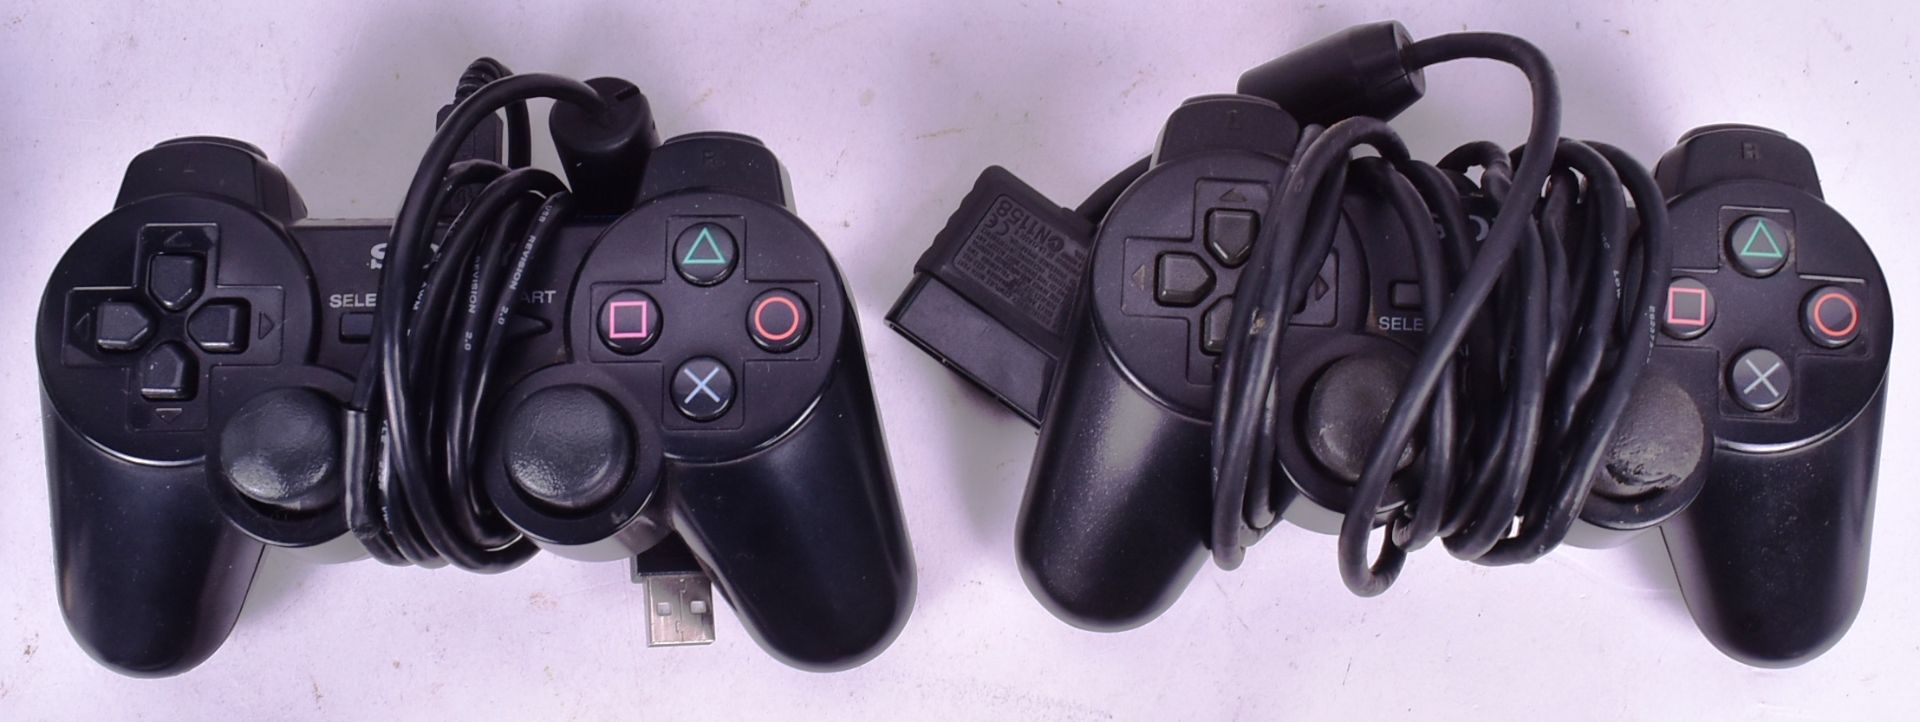 RETRO GAMING - PS2 PLAYSTATION CONSOLE & GAMES - Image 4 of 7